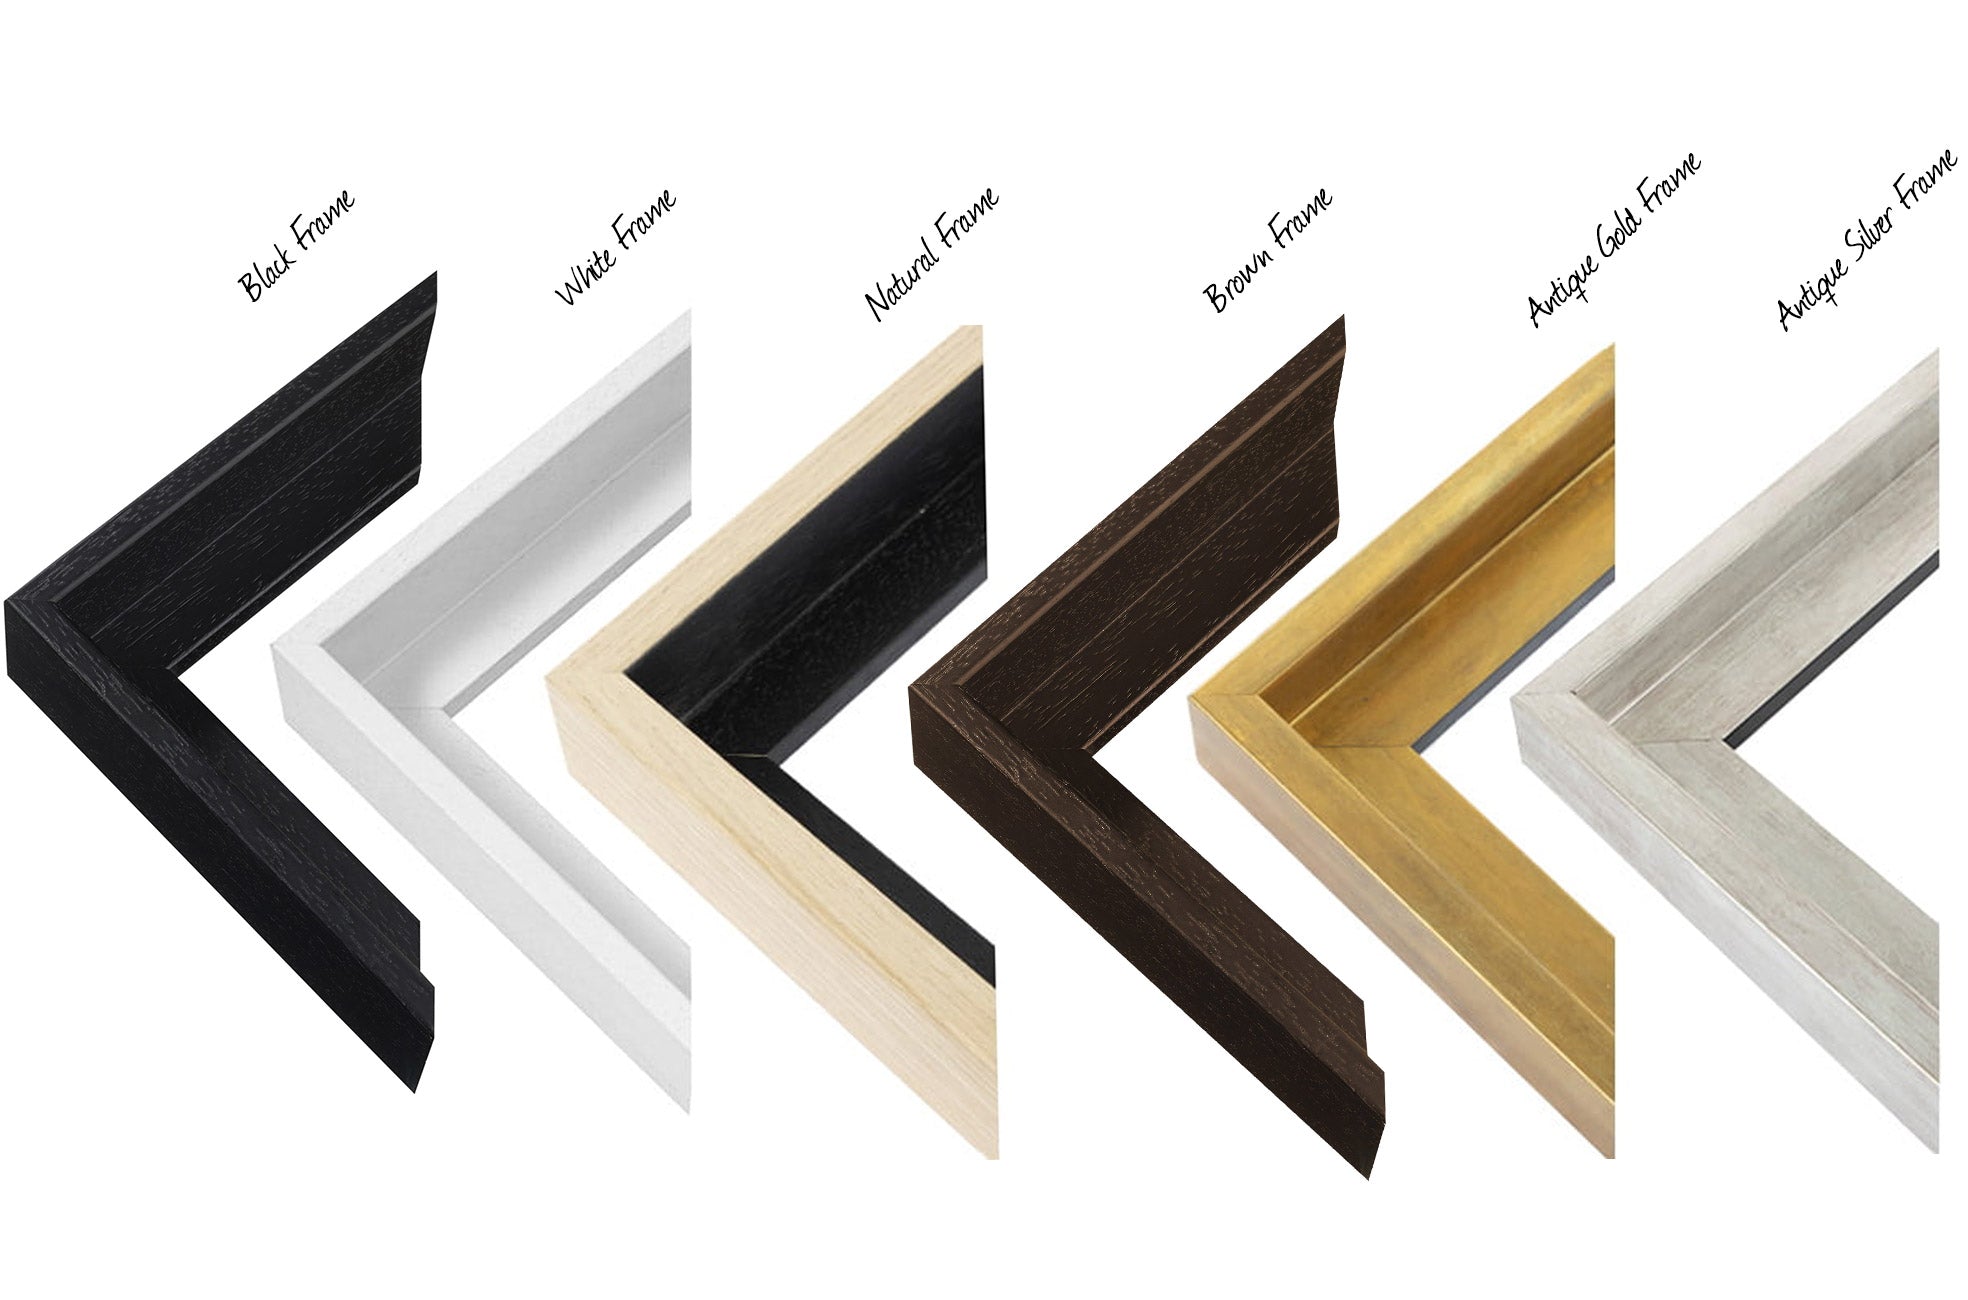 Floating frames in black, white, natural, brown, antique gold and antique silver